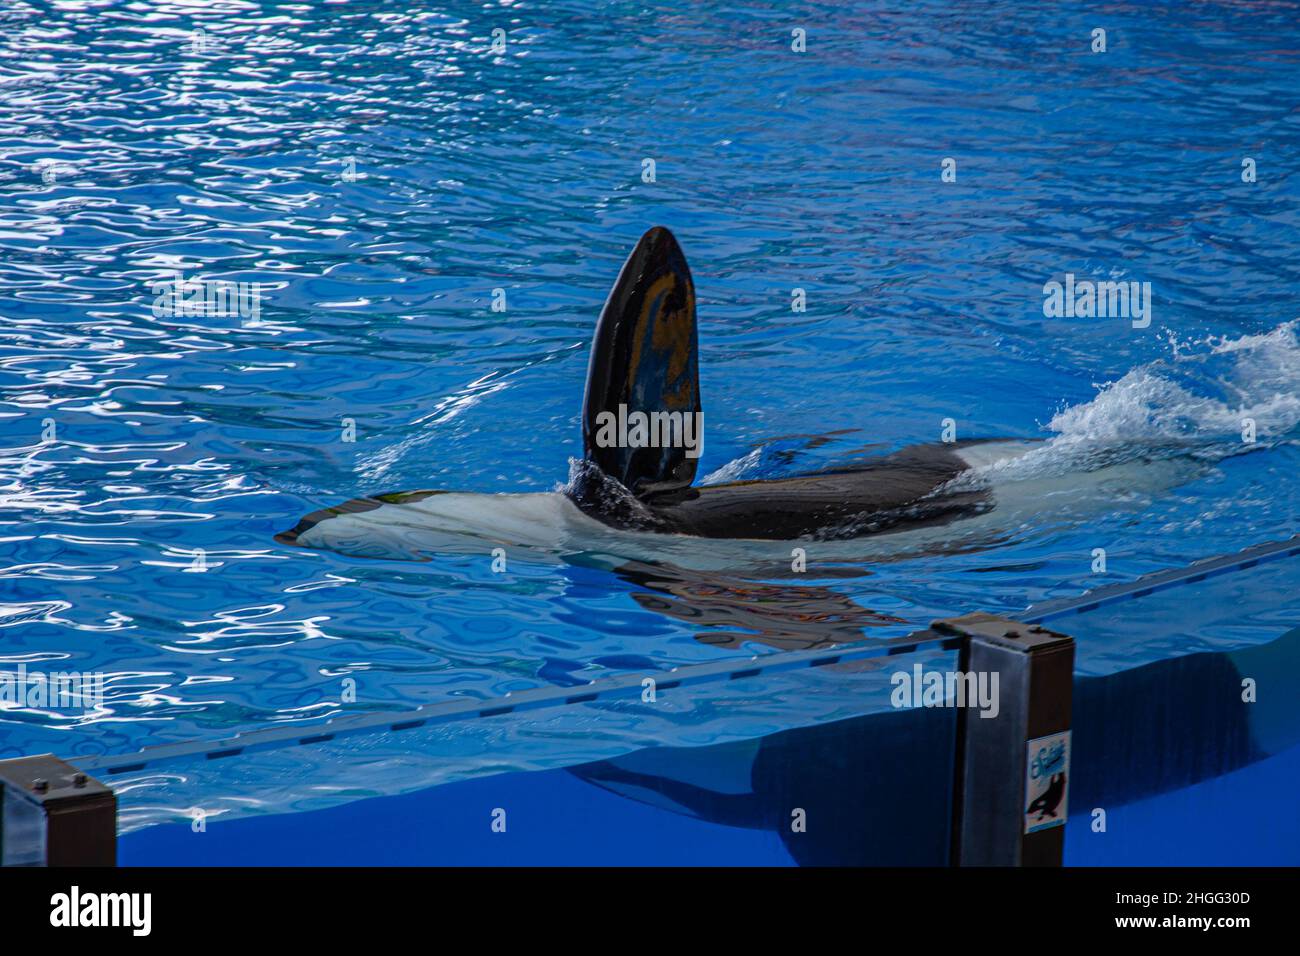 A killer whale swims with one fin exposed during a show at Loro Parque, Tenerife Stock Photo